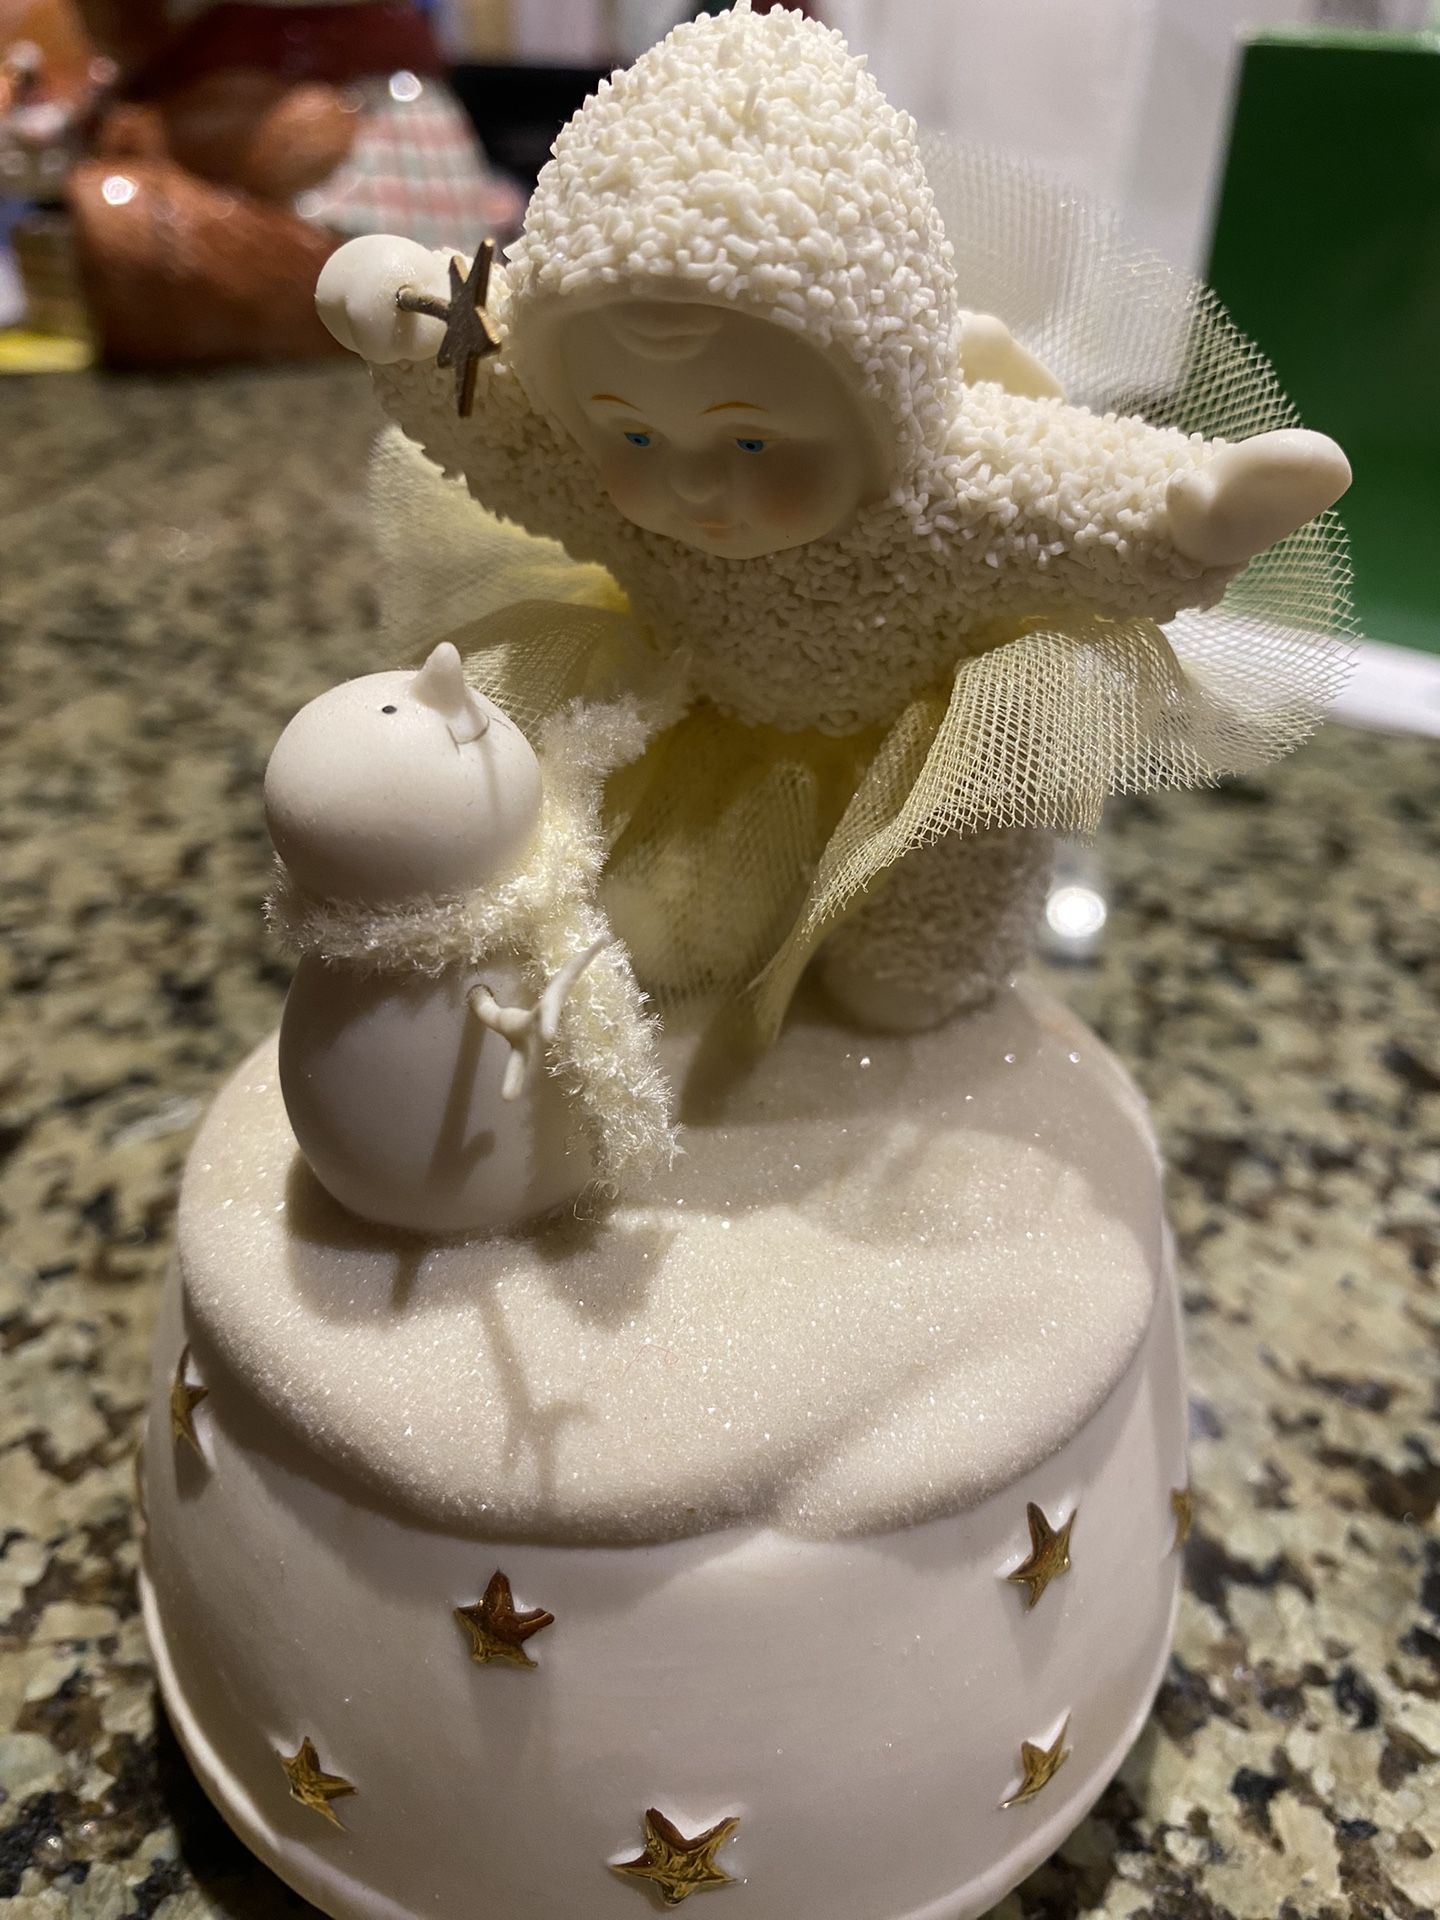  Snowbabies, "A Little Holiday Magic" Music Box Plays "Let It Snow"